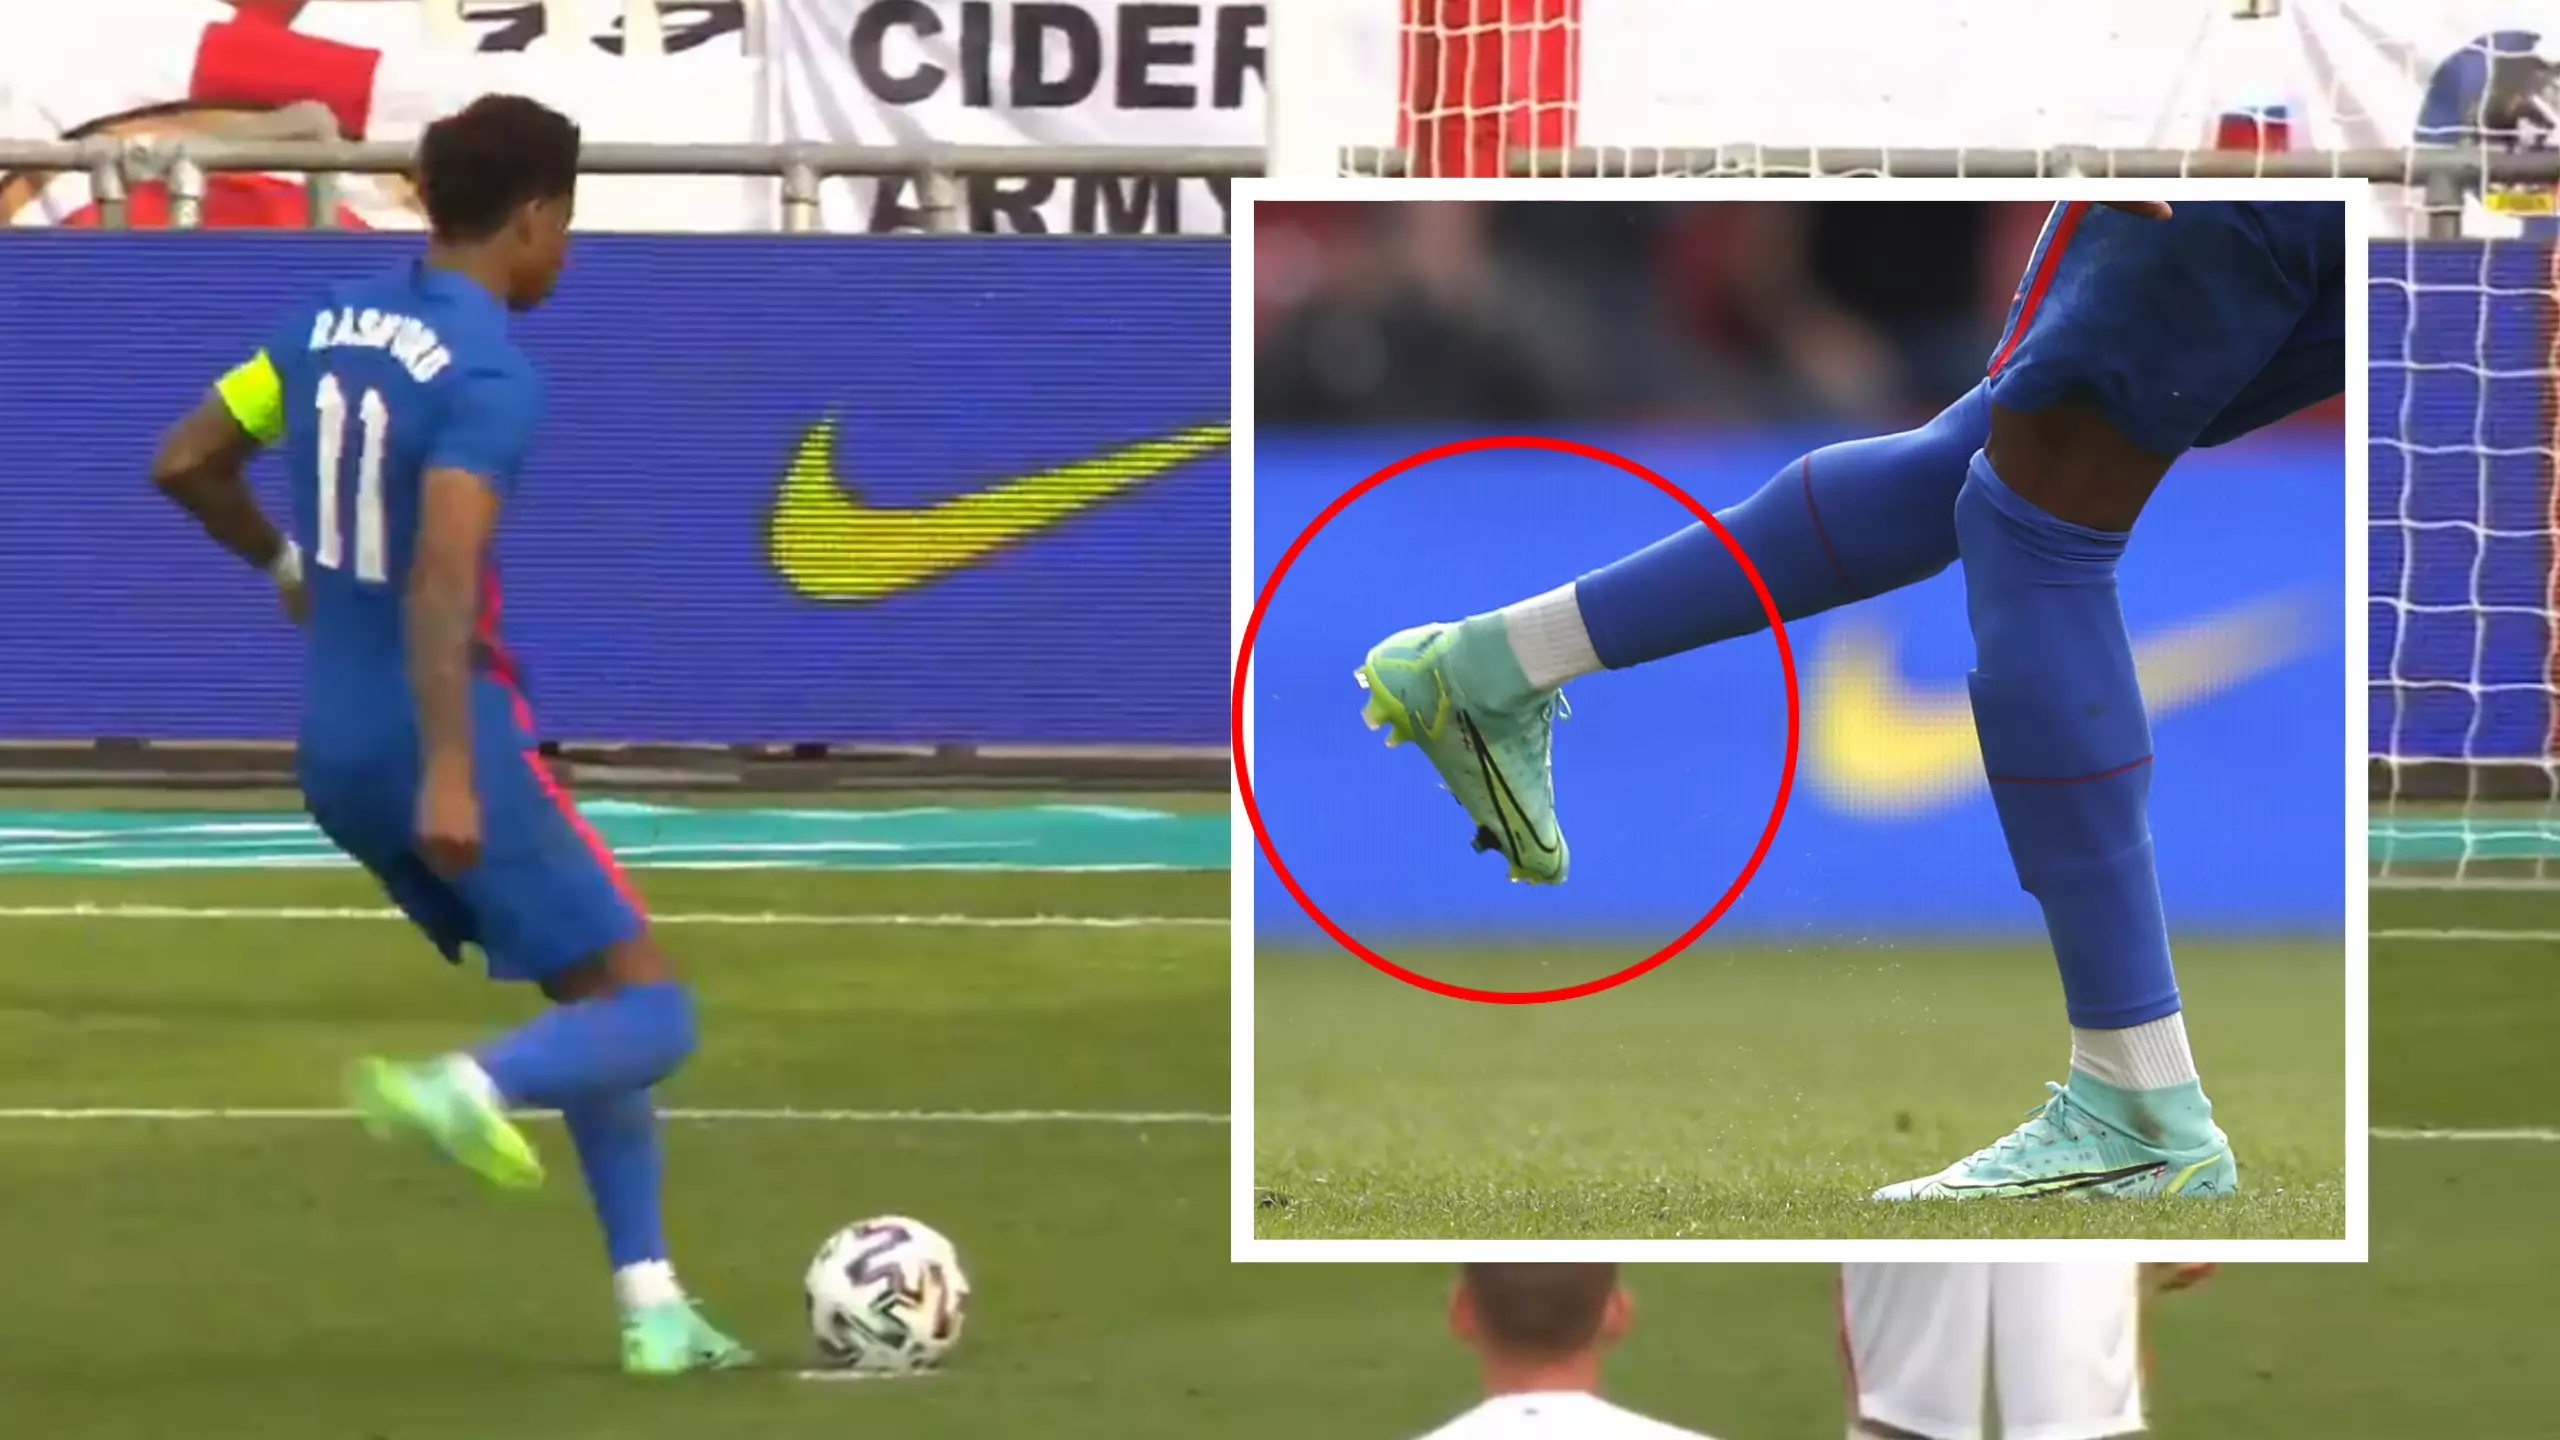 Marcus Rashford's Remarkable Penalty Technique Twists His Ankle In Such An Unnatural Way